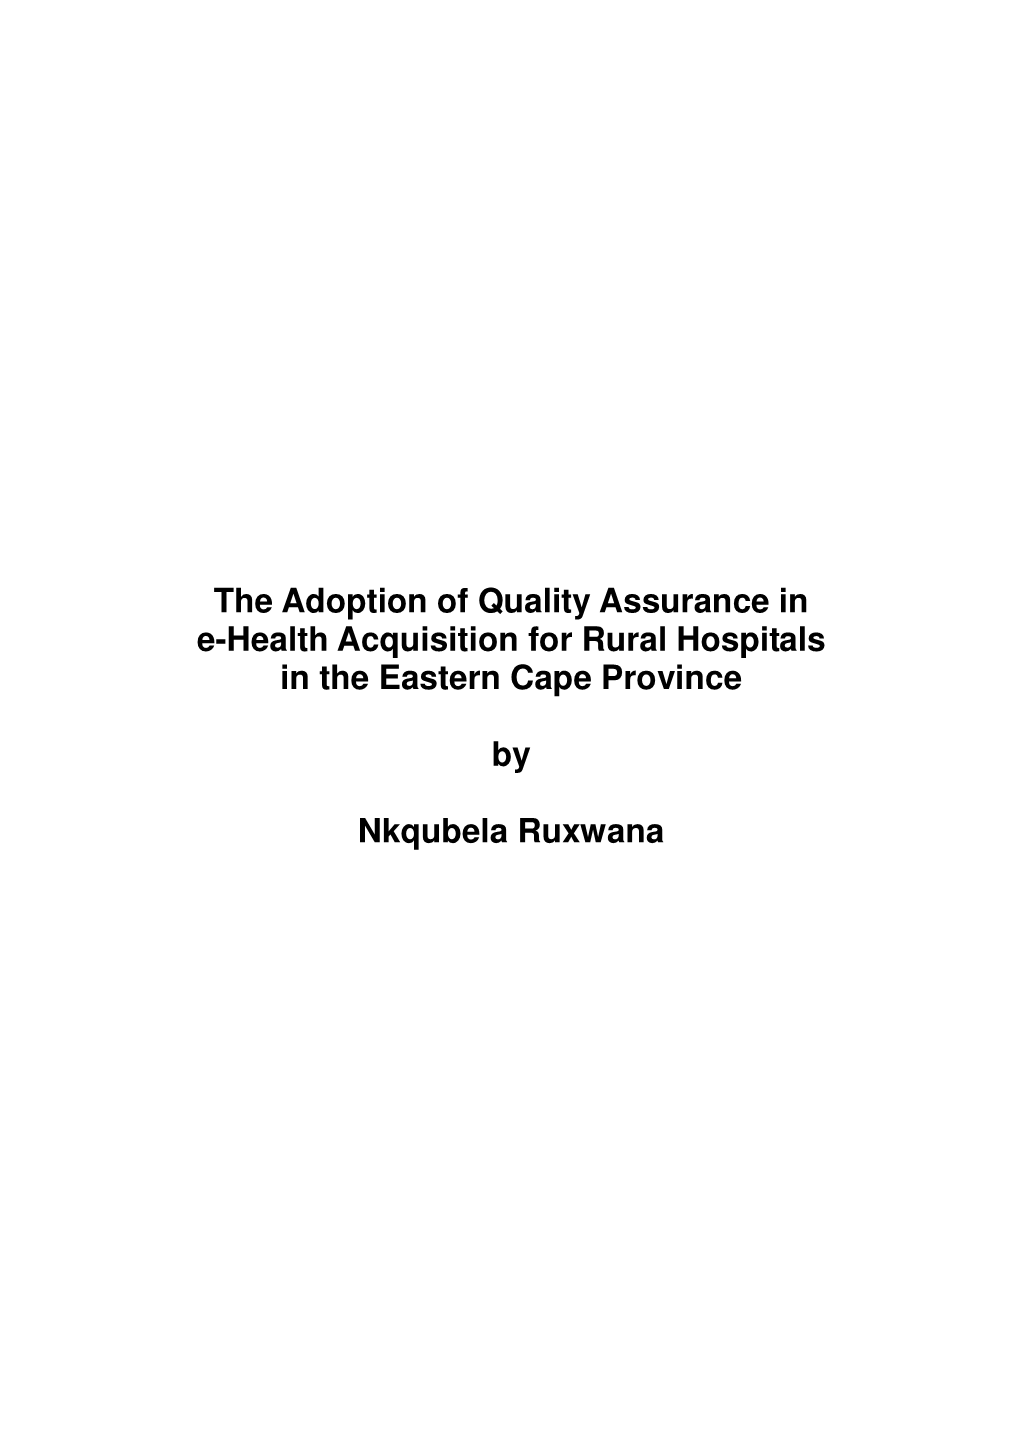 The Adoption of Quality Assurance in E-Health Acquisition for Rural Hospitals in the Eastern Cape Province